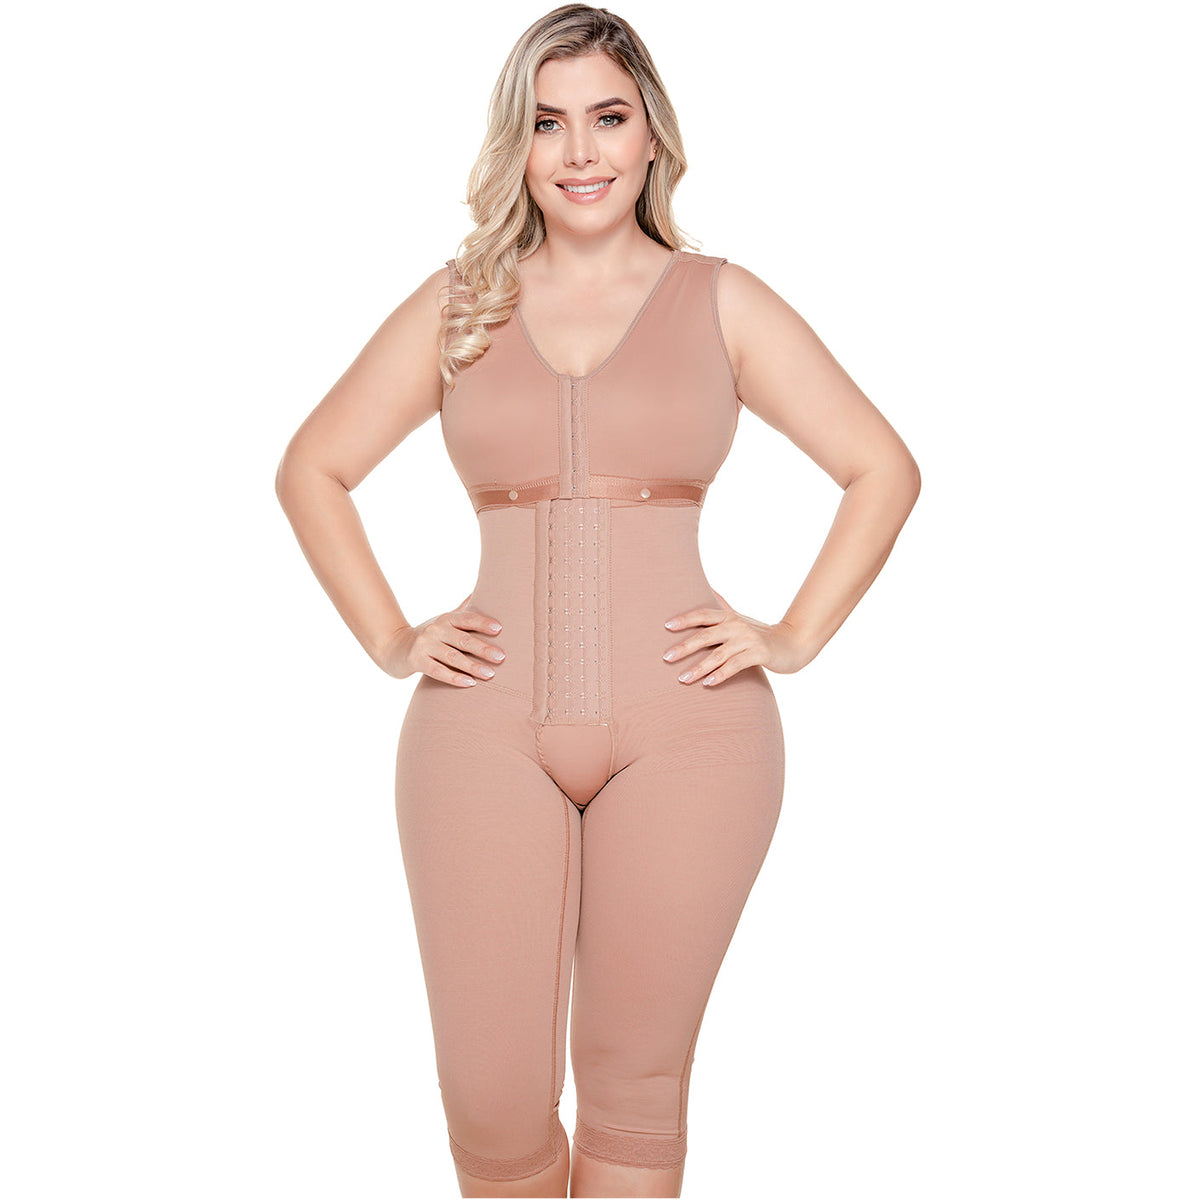 SONRYSE 052  Full Body Shaper for Post Surgery with Built-in Bra | Butt Lifting  and Tummy Control